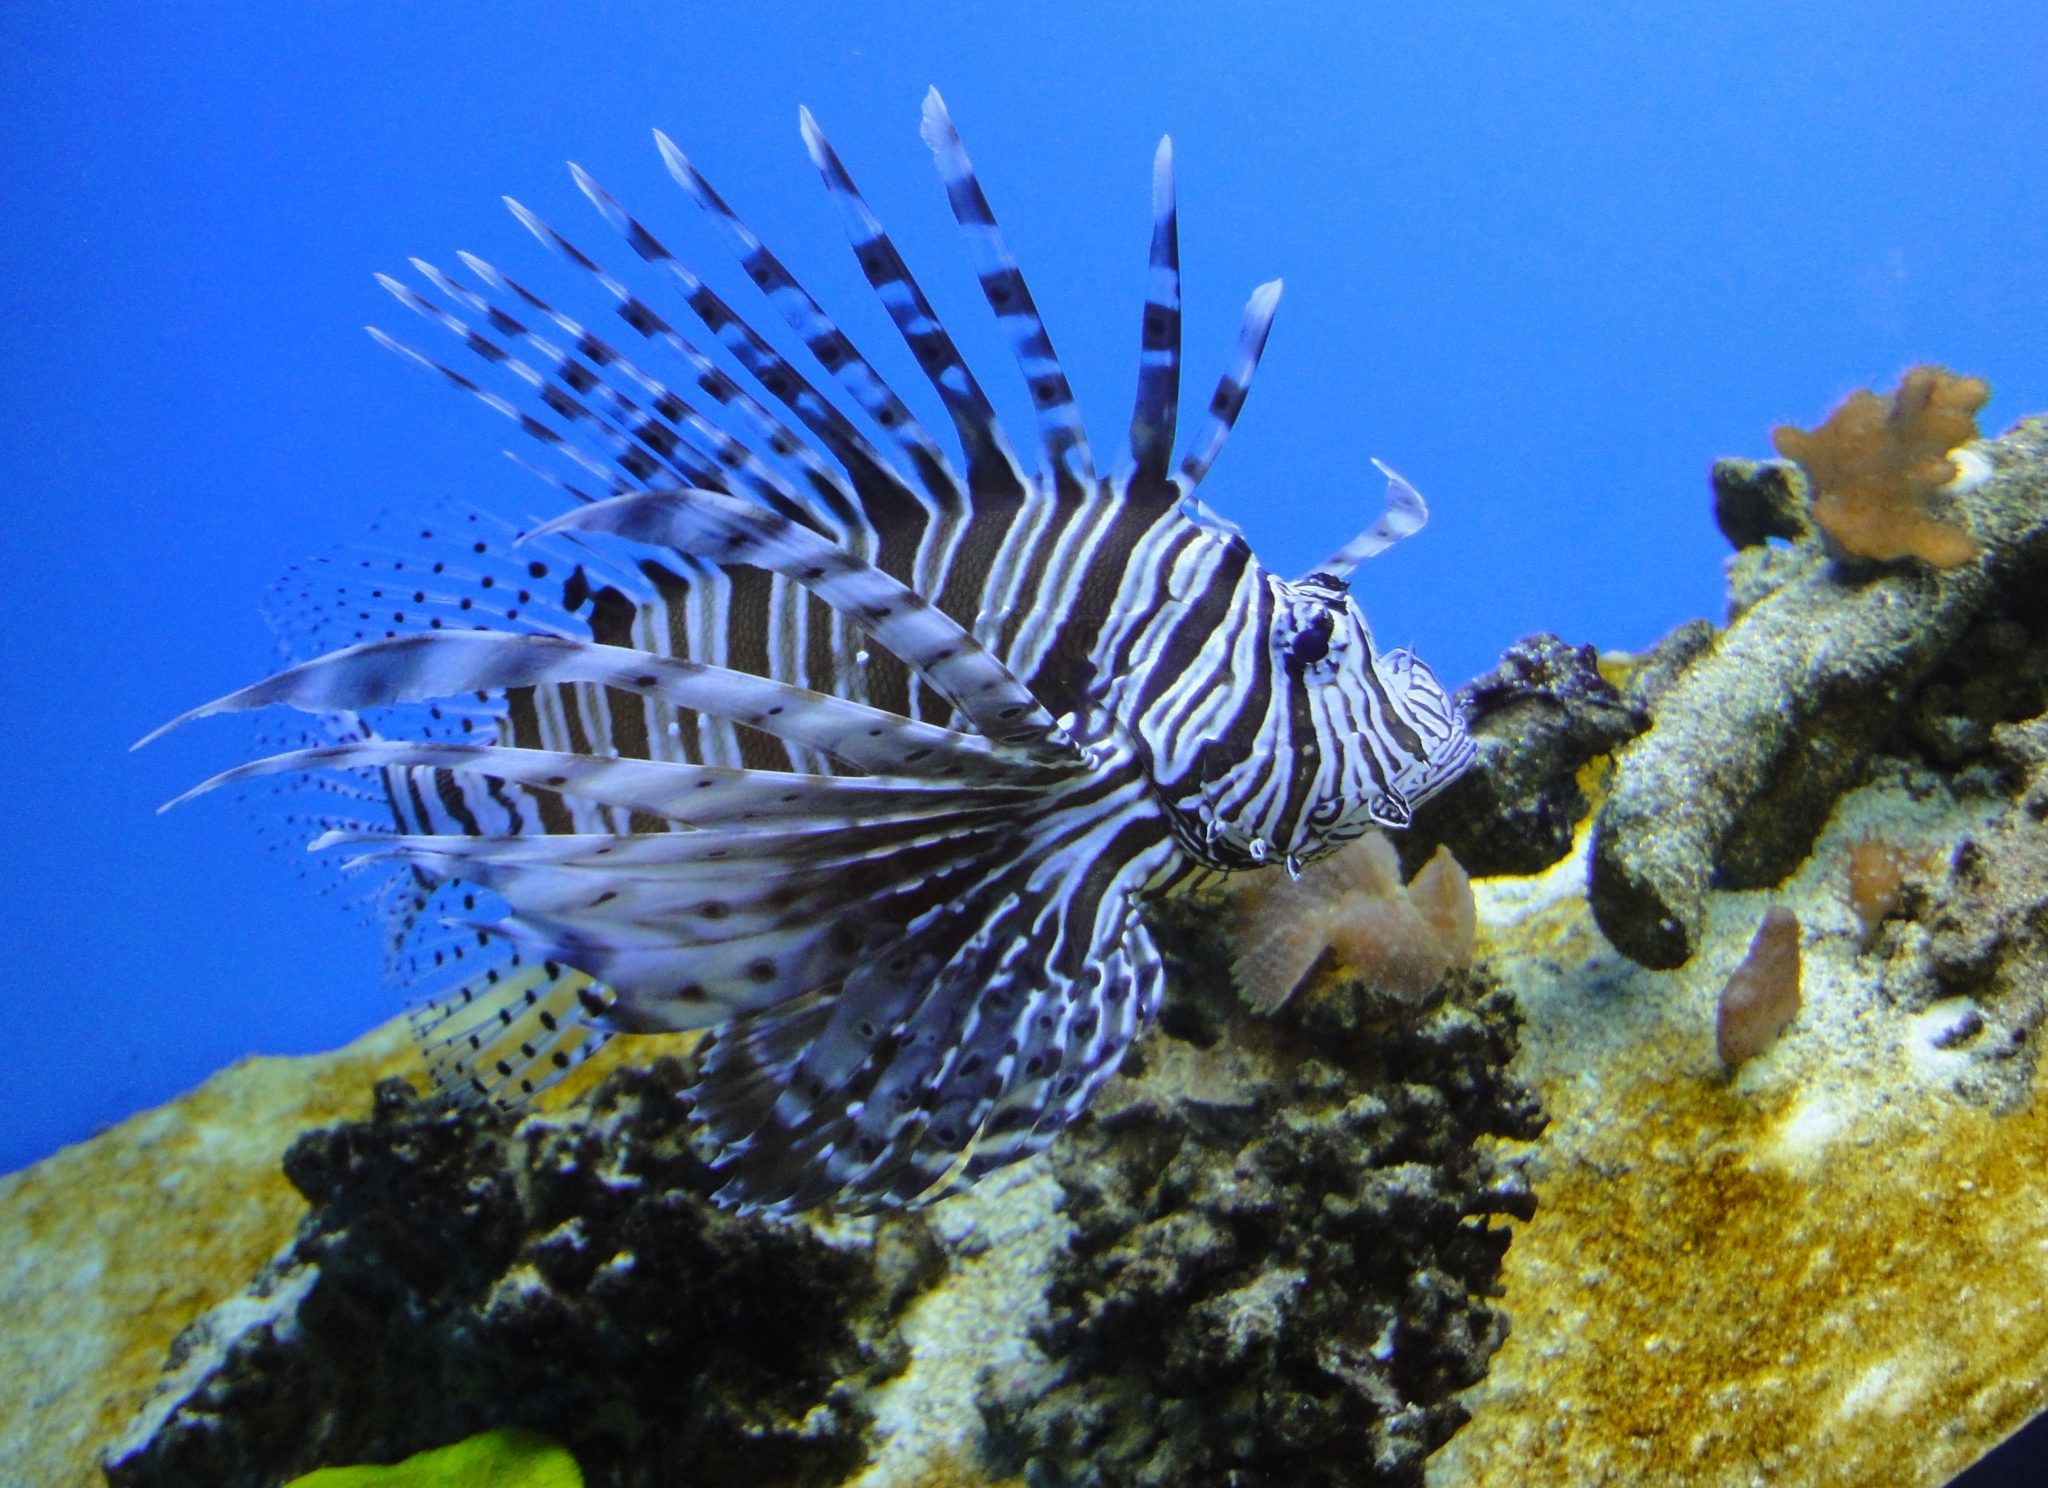 Pterois volitans, Red Lionfish, Common Lionfish, Featherfins, Ornate Butterfly-cod, Peacock Lionfish, Red Firefish, Scorpion-cod, Scorpion Volitans, Turkeyfish, Zebrafish